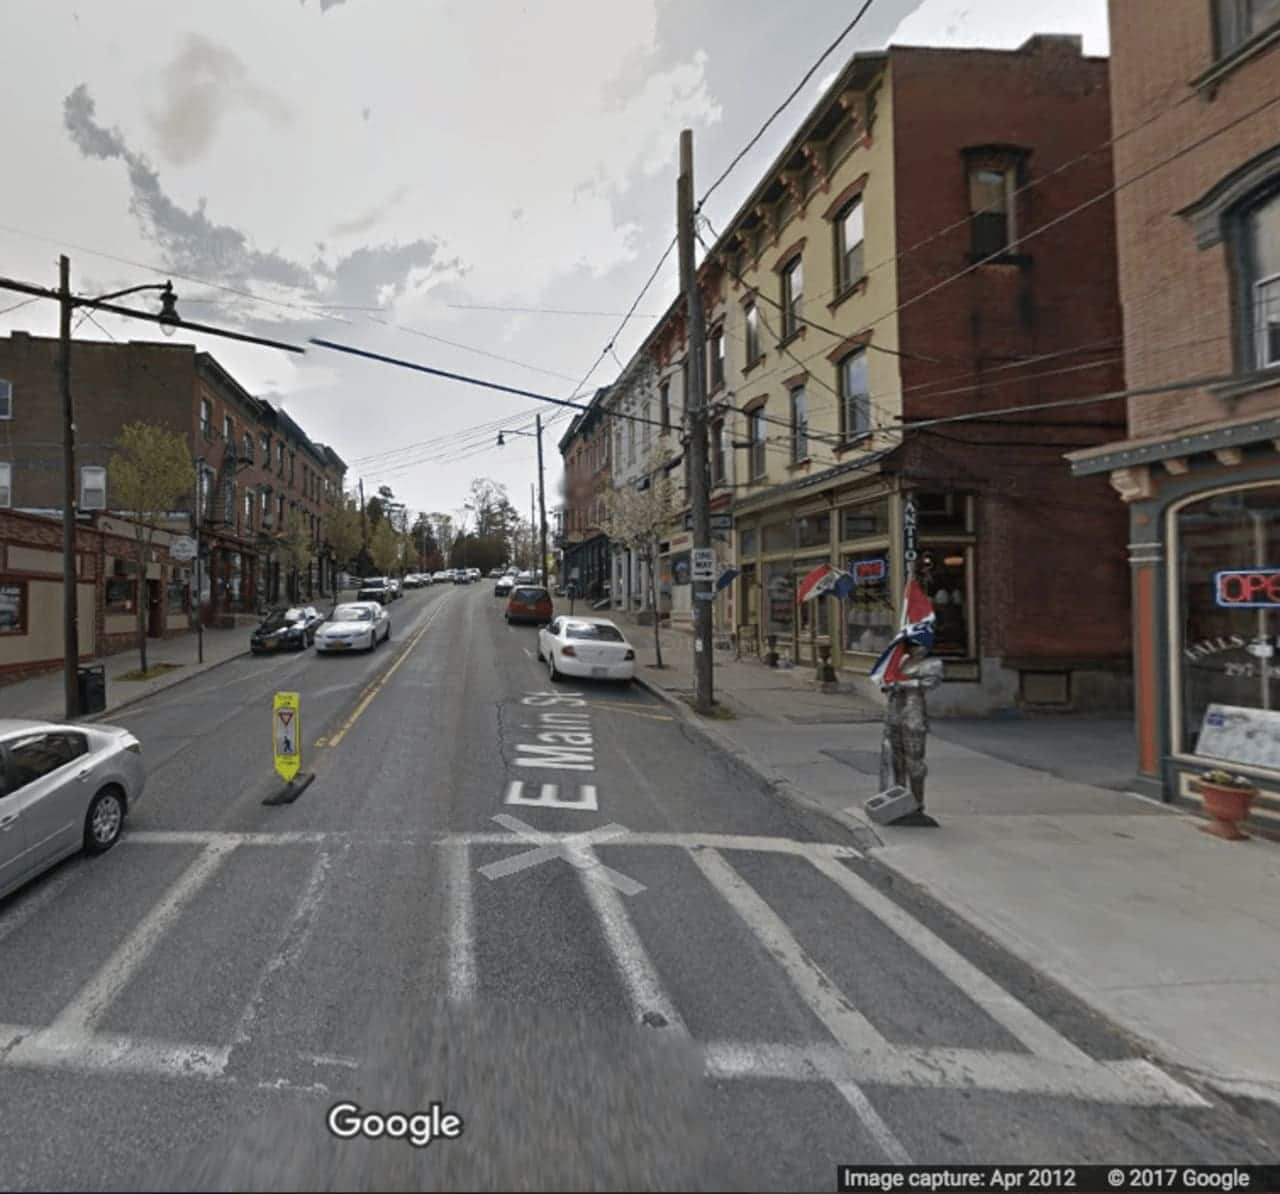 The area of East Main Street (Route 9D) in Wappingers Falls where the fire broke out.